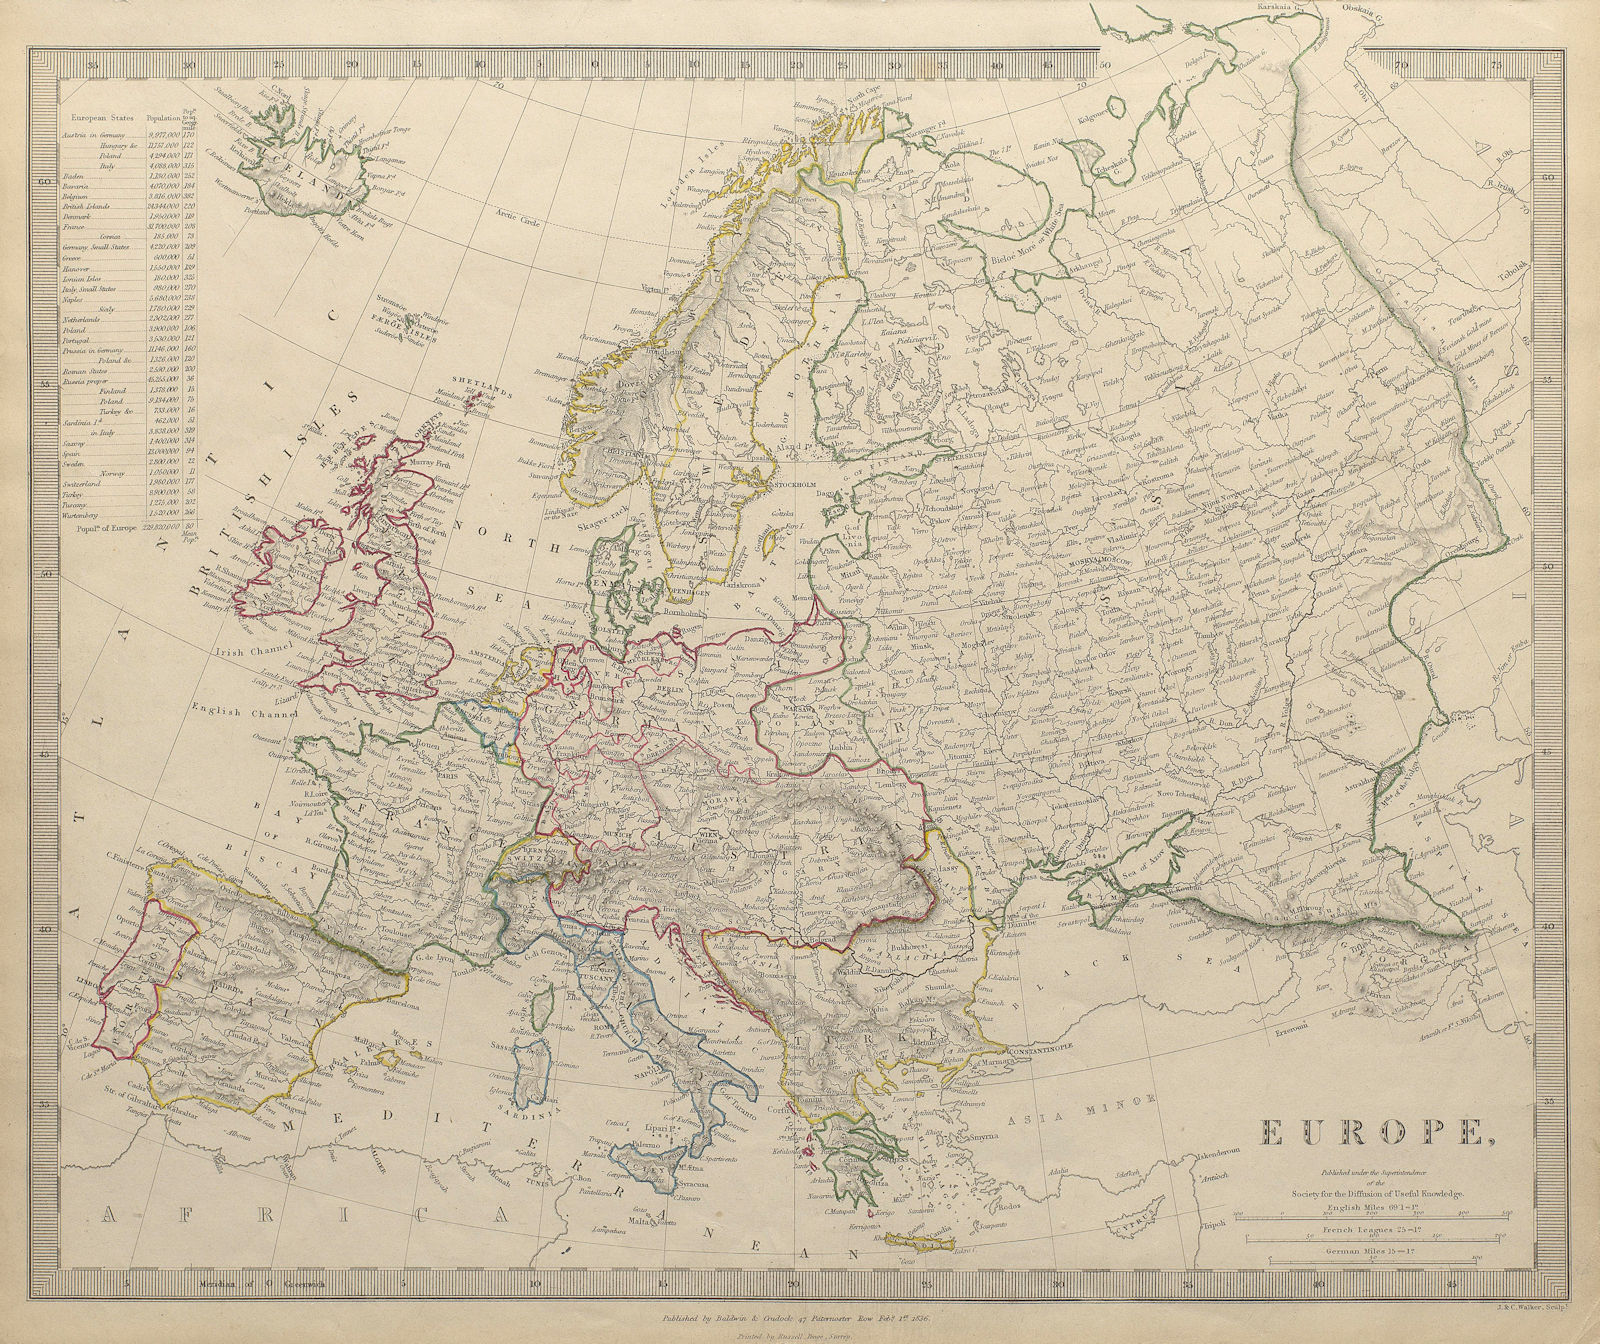 Associate Product EUROPE. General map. Inset table of population & density by country. SDUK 1844